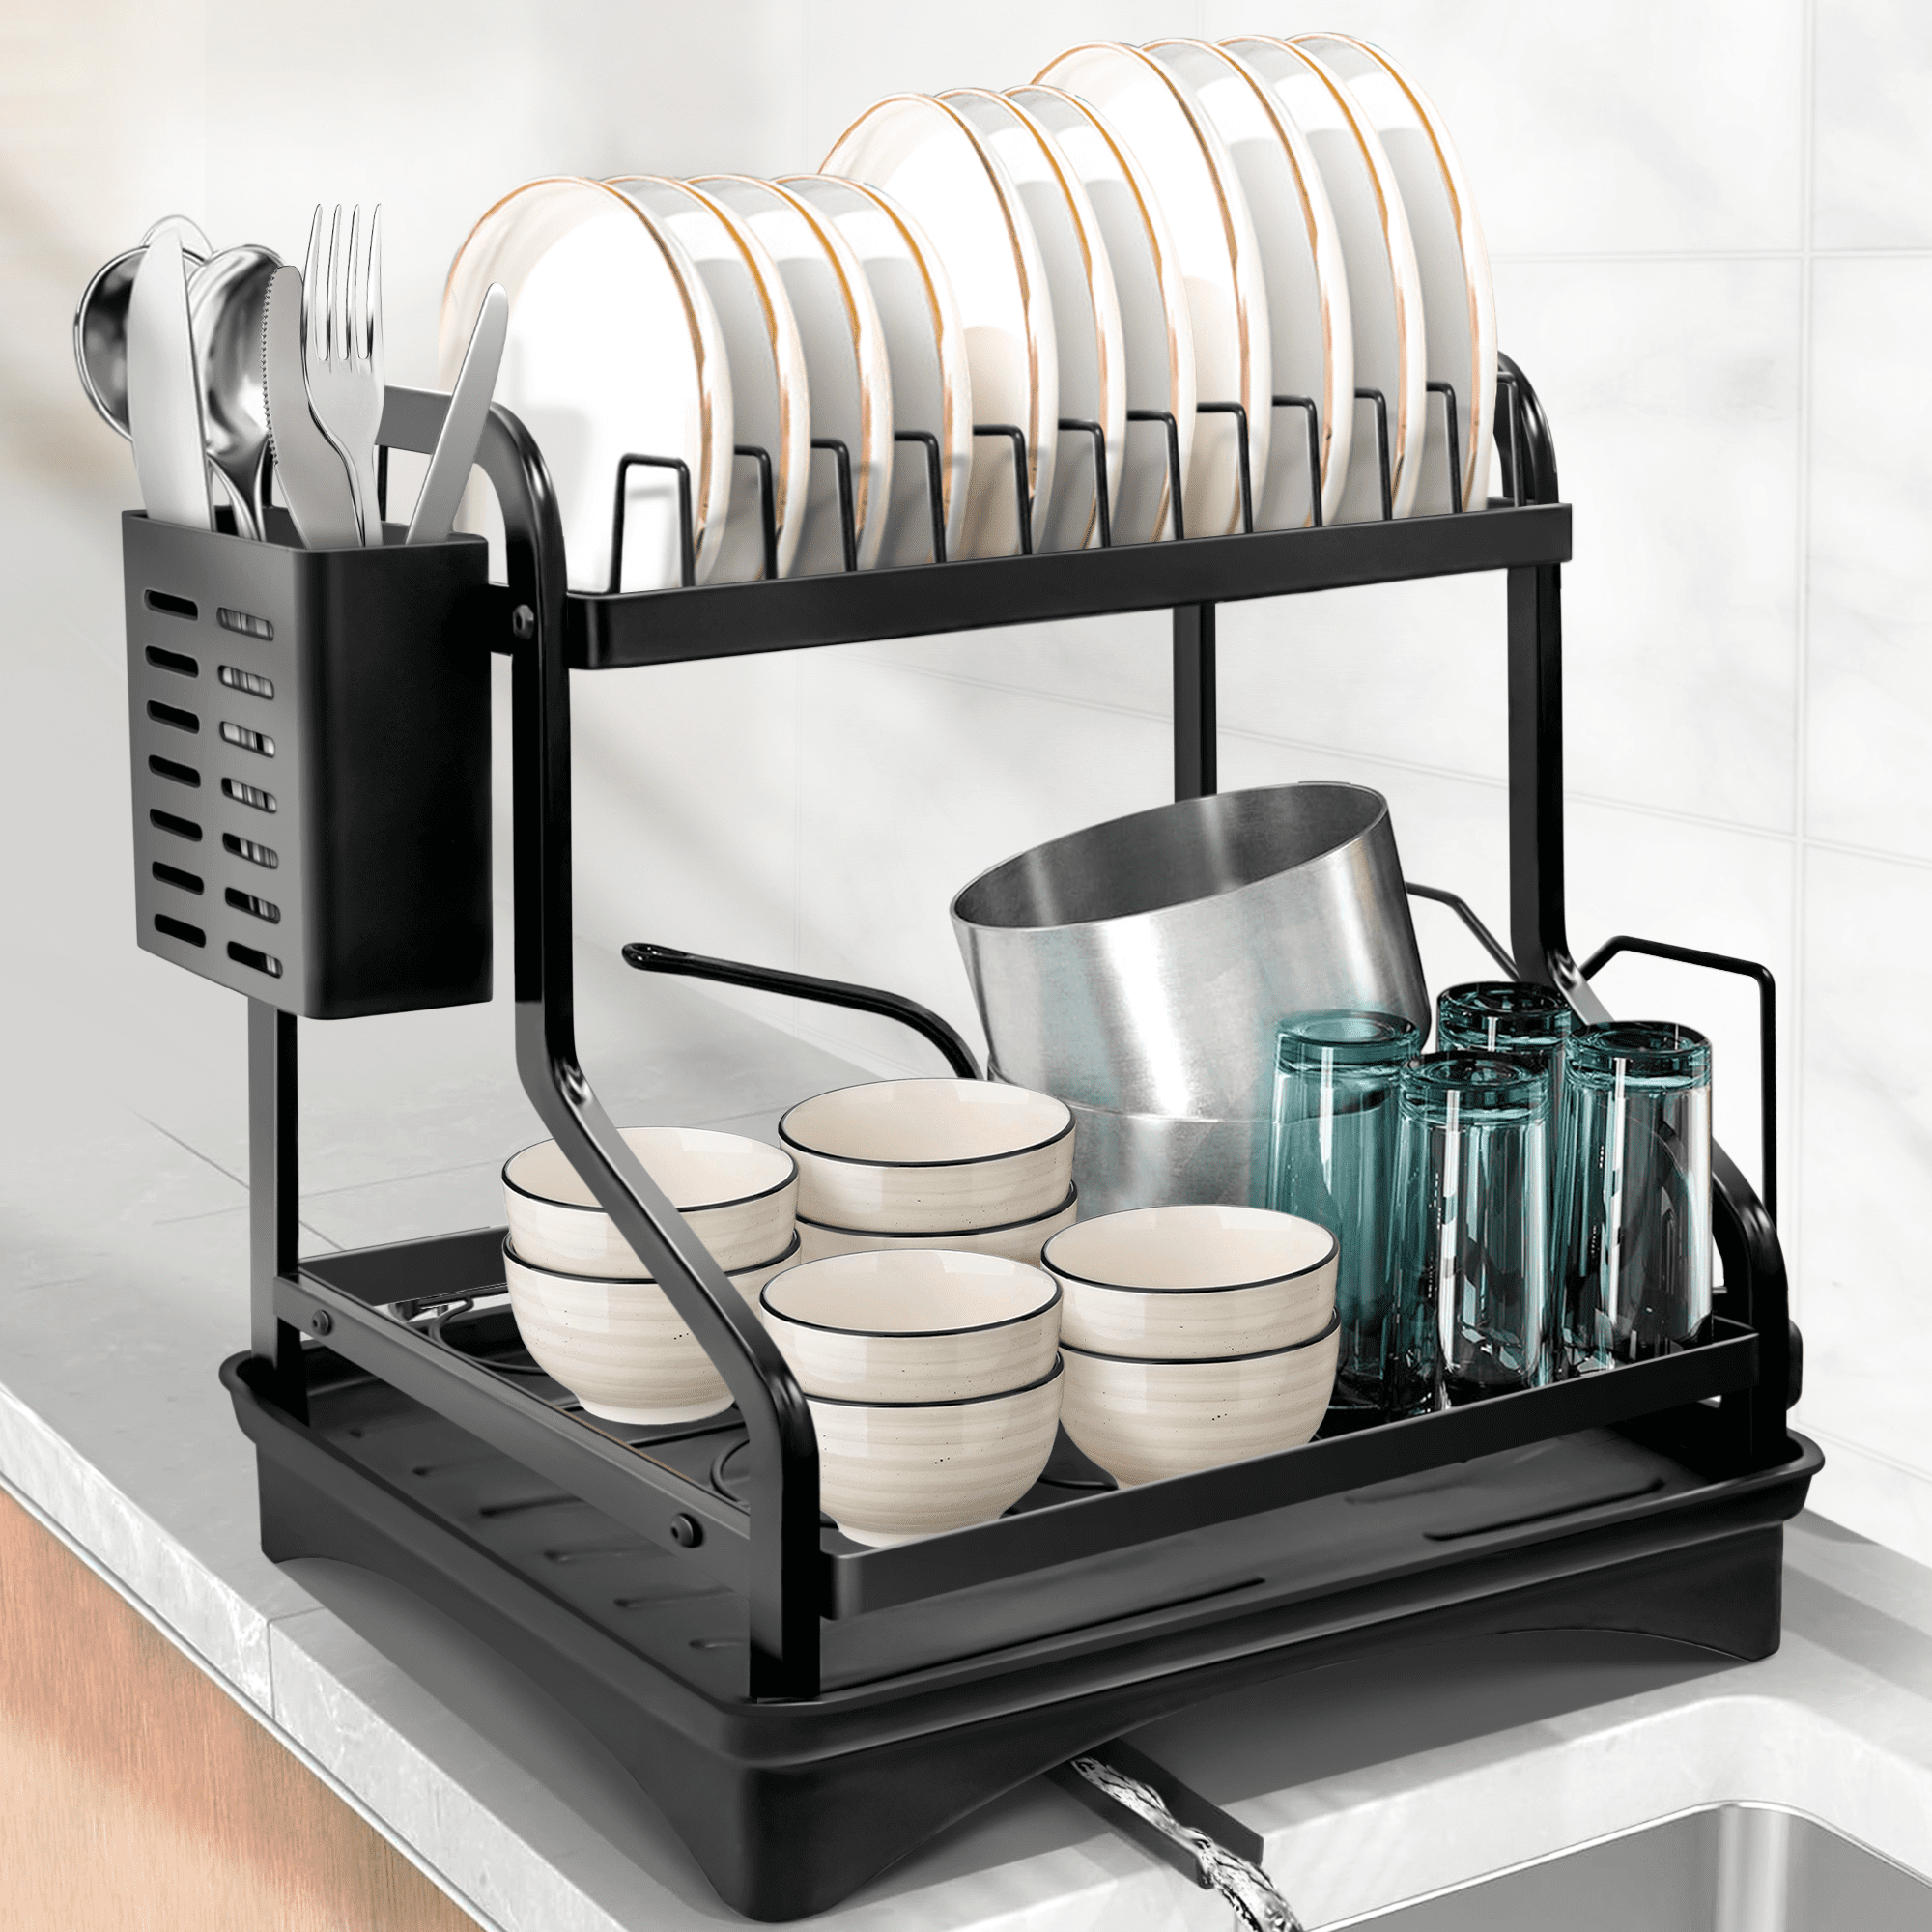 Wahopy Extra Large Dish Drying Rack - 2 Tier Dish Drying Rack with